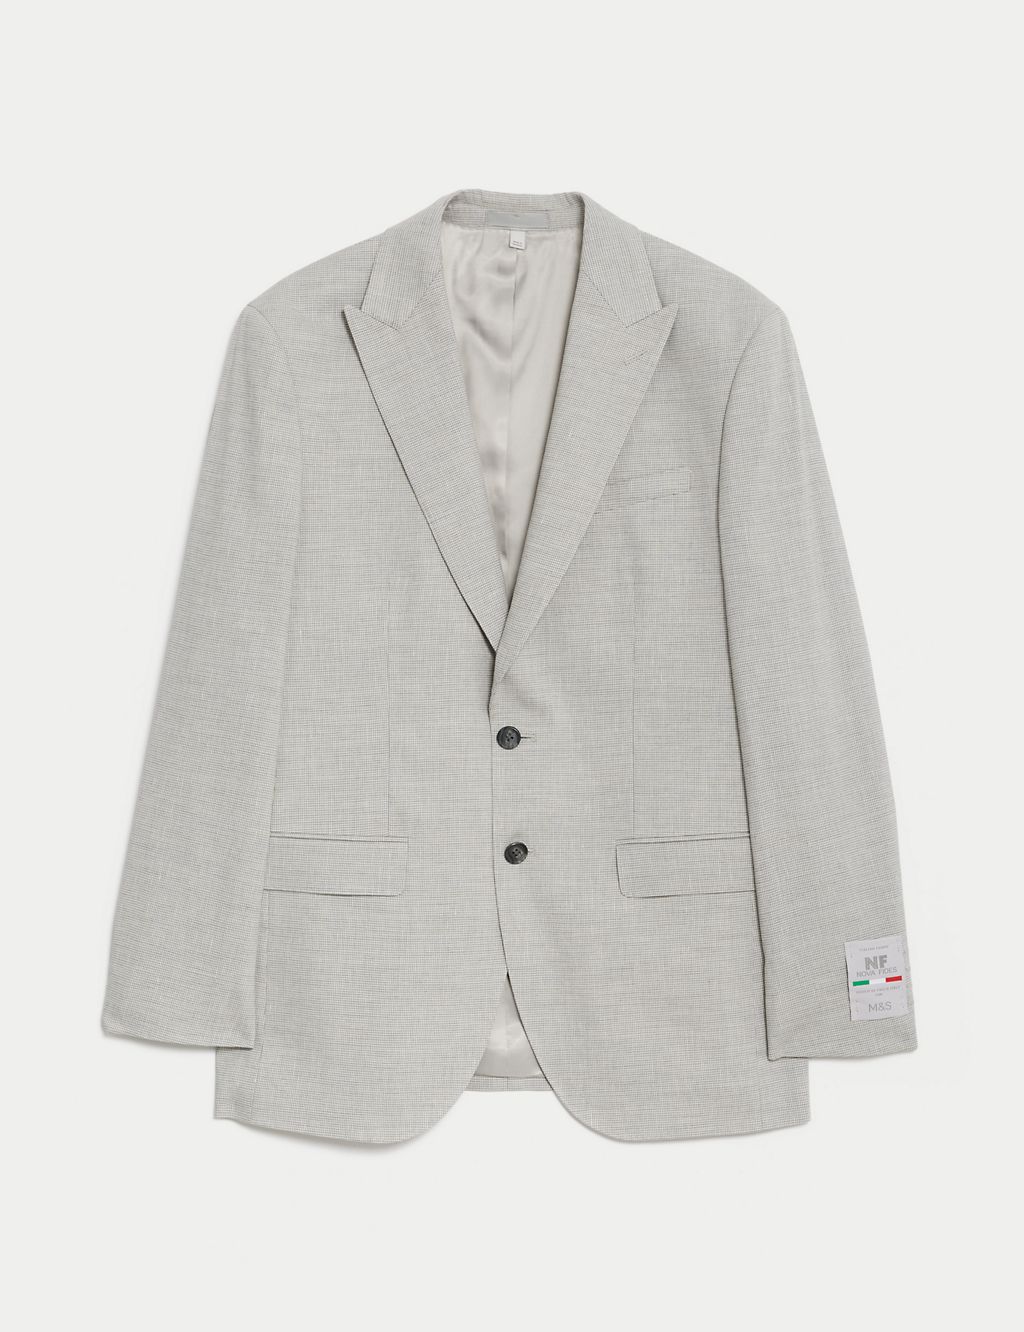 Tailored Fit Italian Linen Miracle™ Suit Jacket 1 of 7